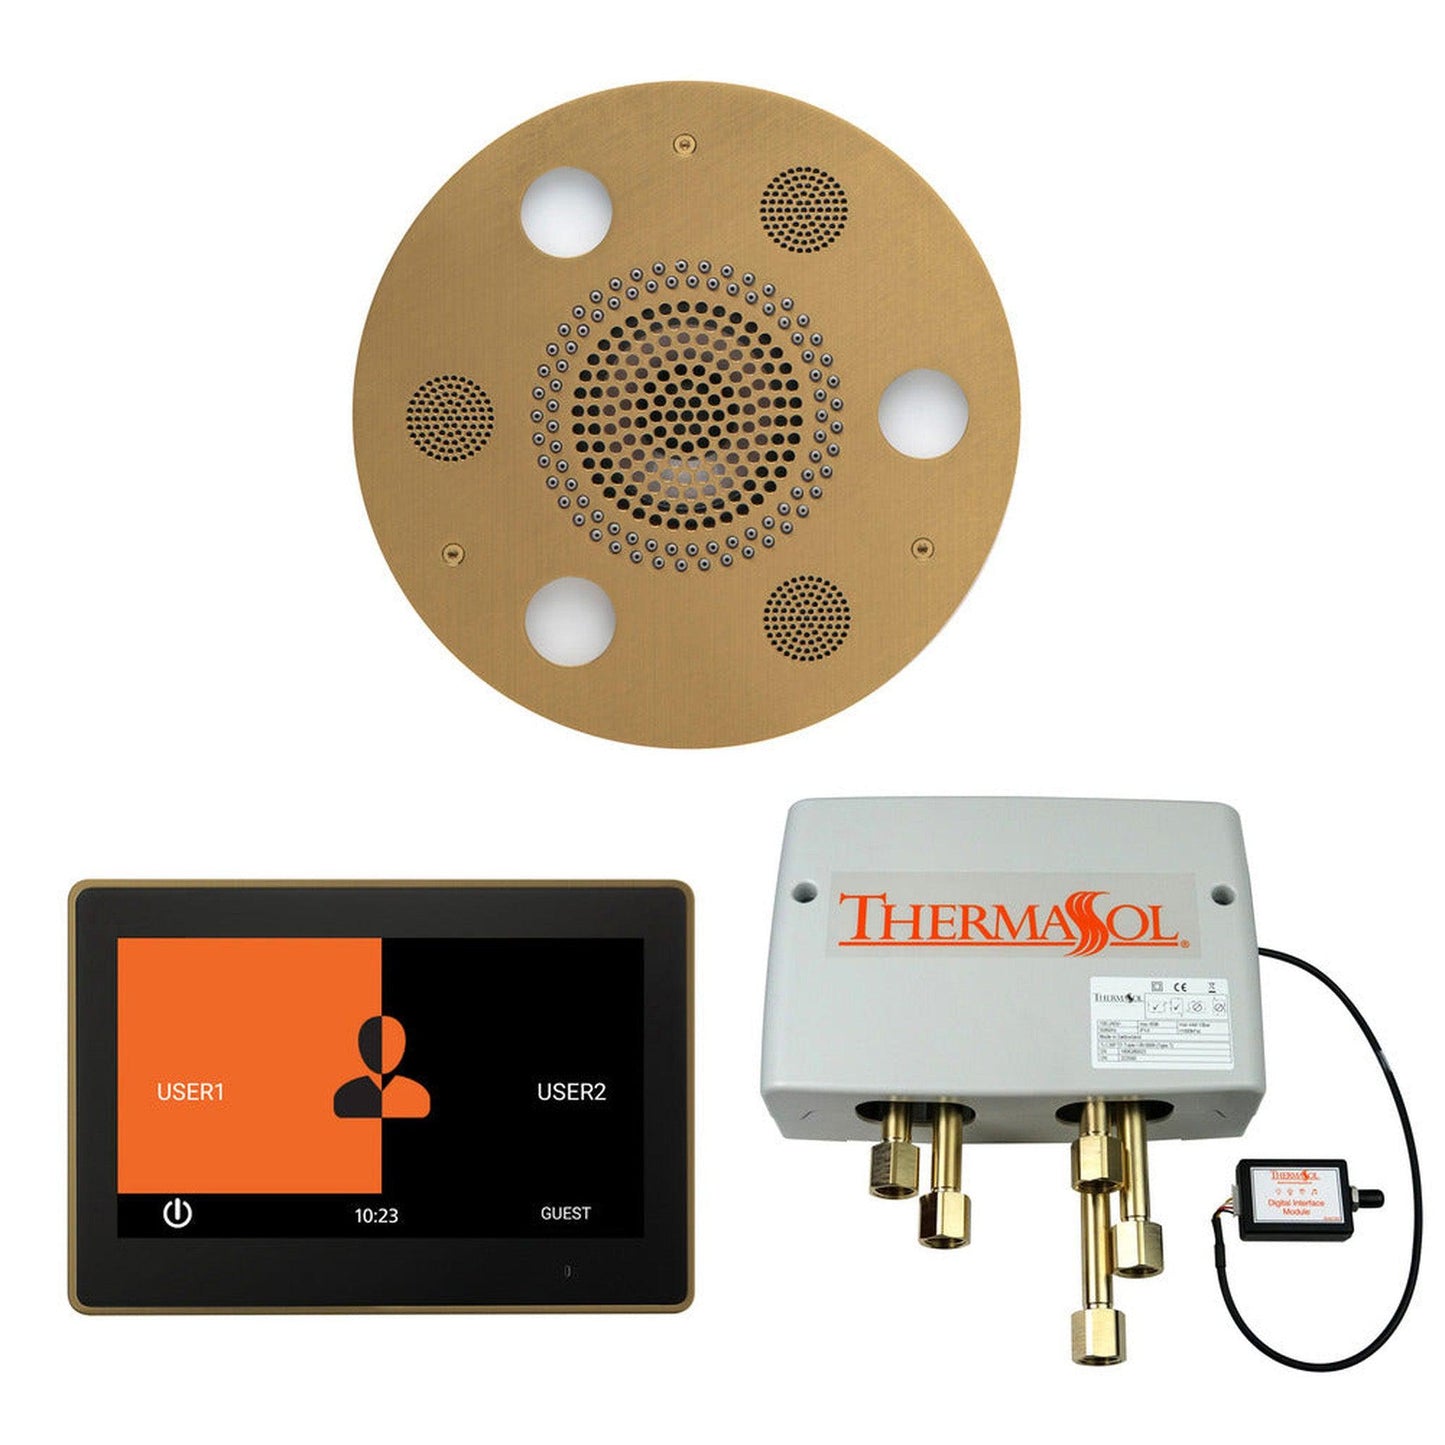 ThermaSol The Wellness Satin Brass Finish Serenity Advancedd Round Shower Package with 10" ThermaTouch